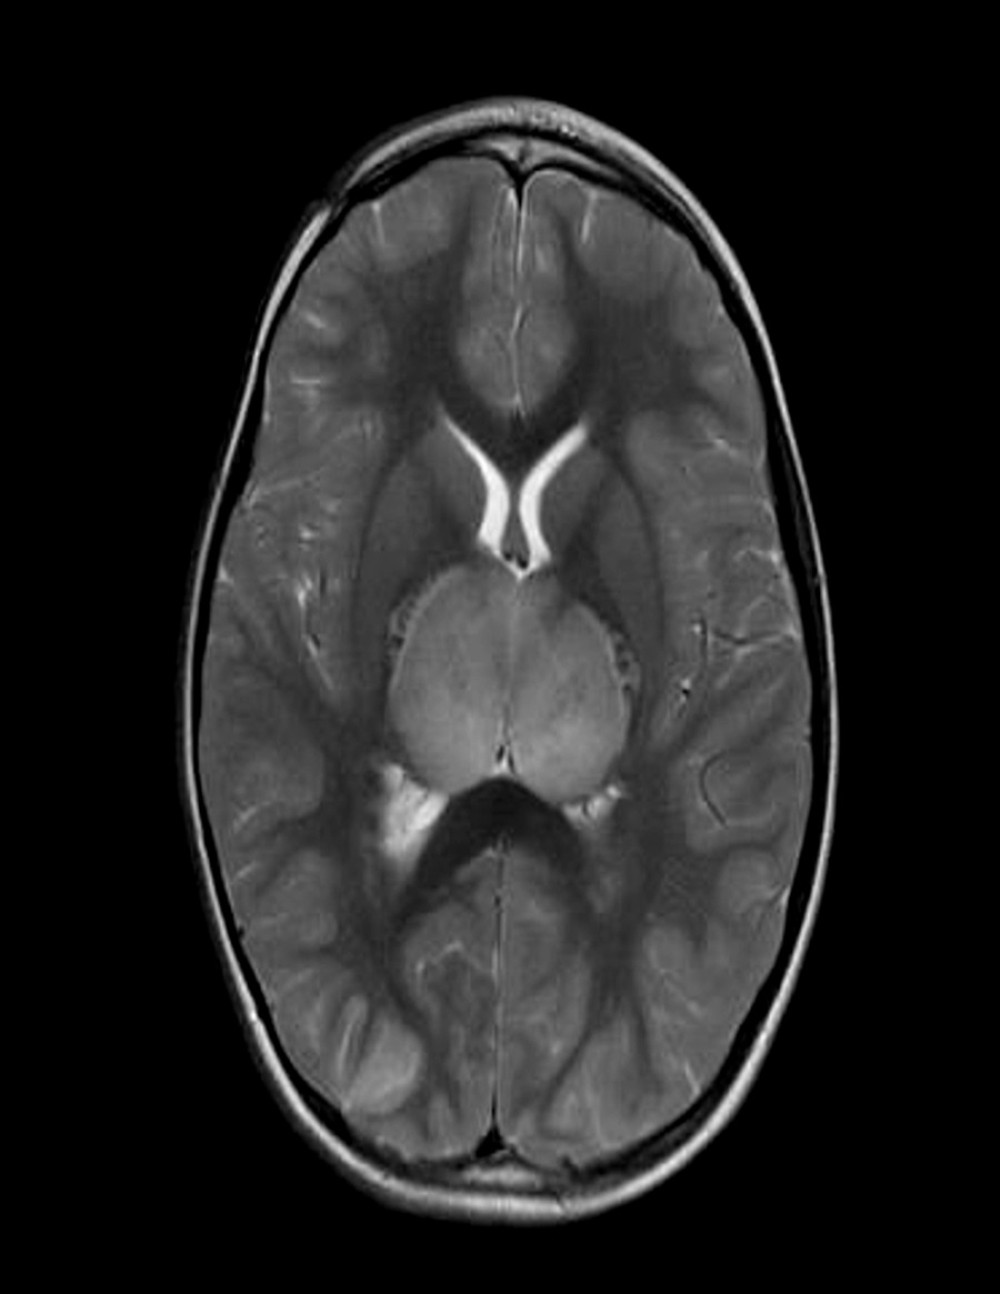 Brain MRI transverse relaxation time (T2) sequence axial view showing extensive symmetrical bilateral thalamic swelling.